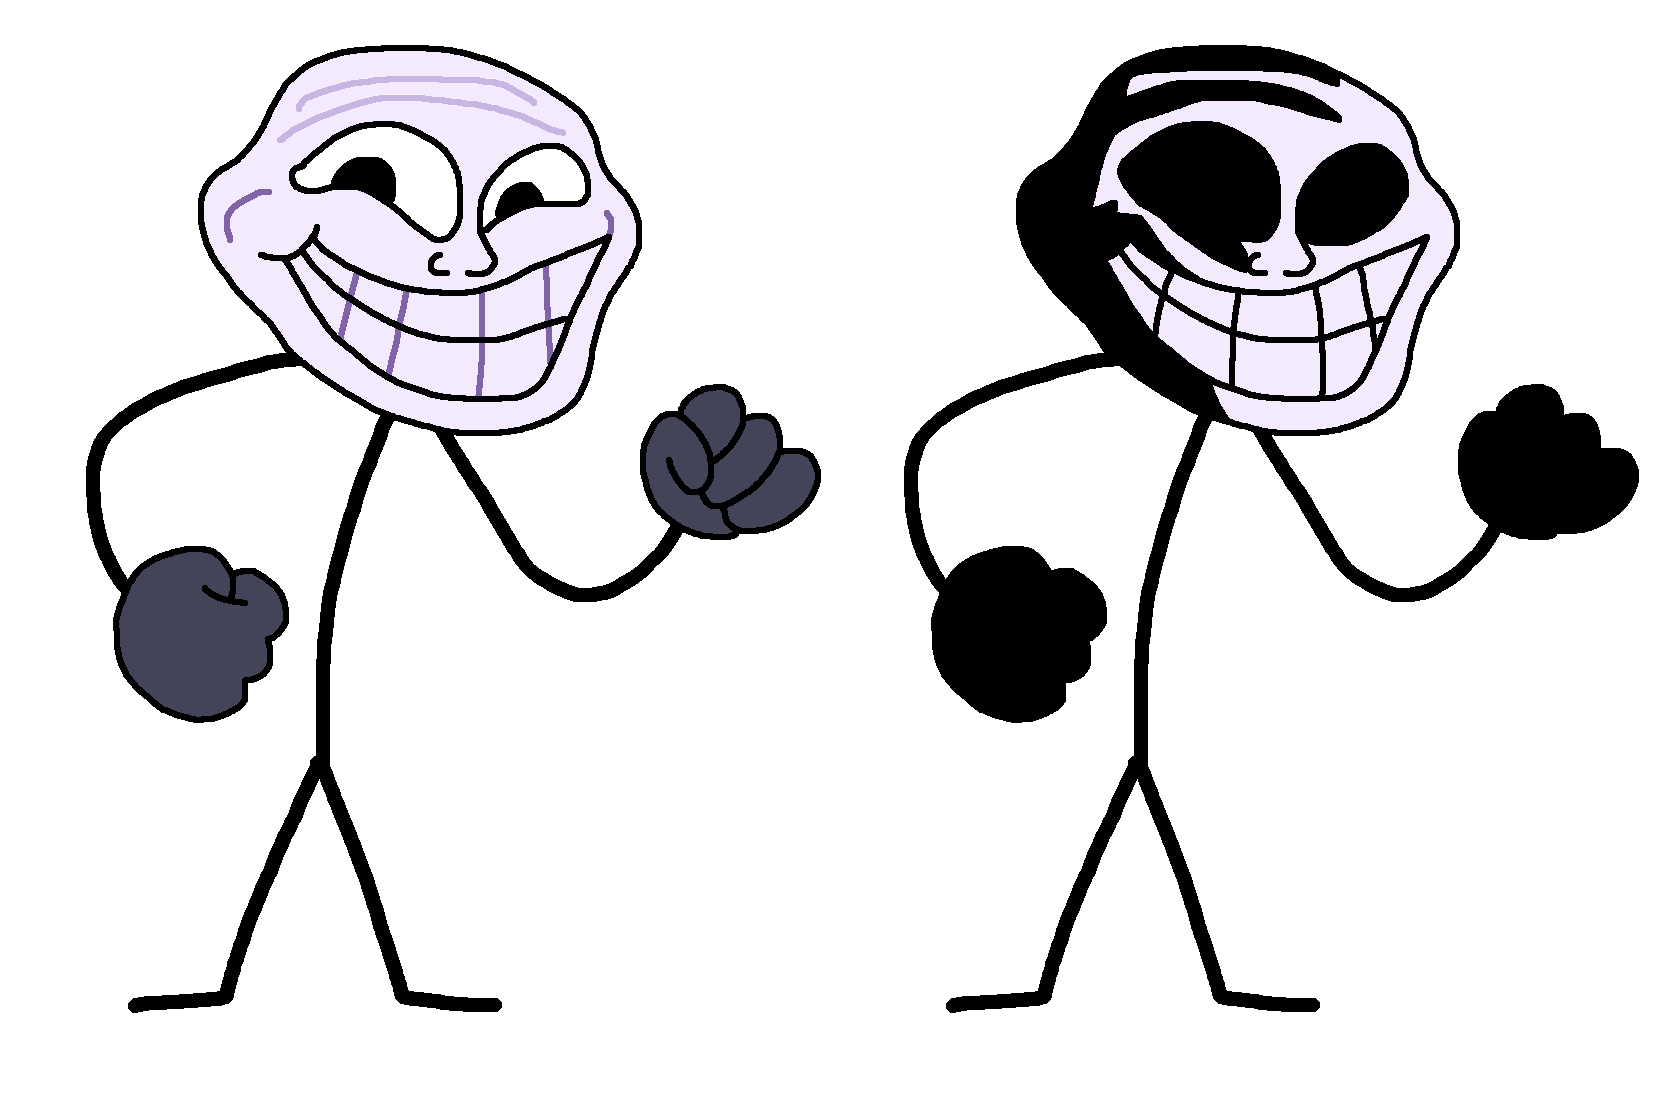 Trollface And Trollge by richsquid1996 on DeviantArt